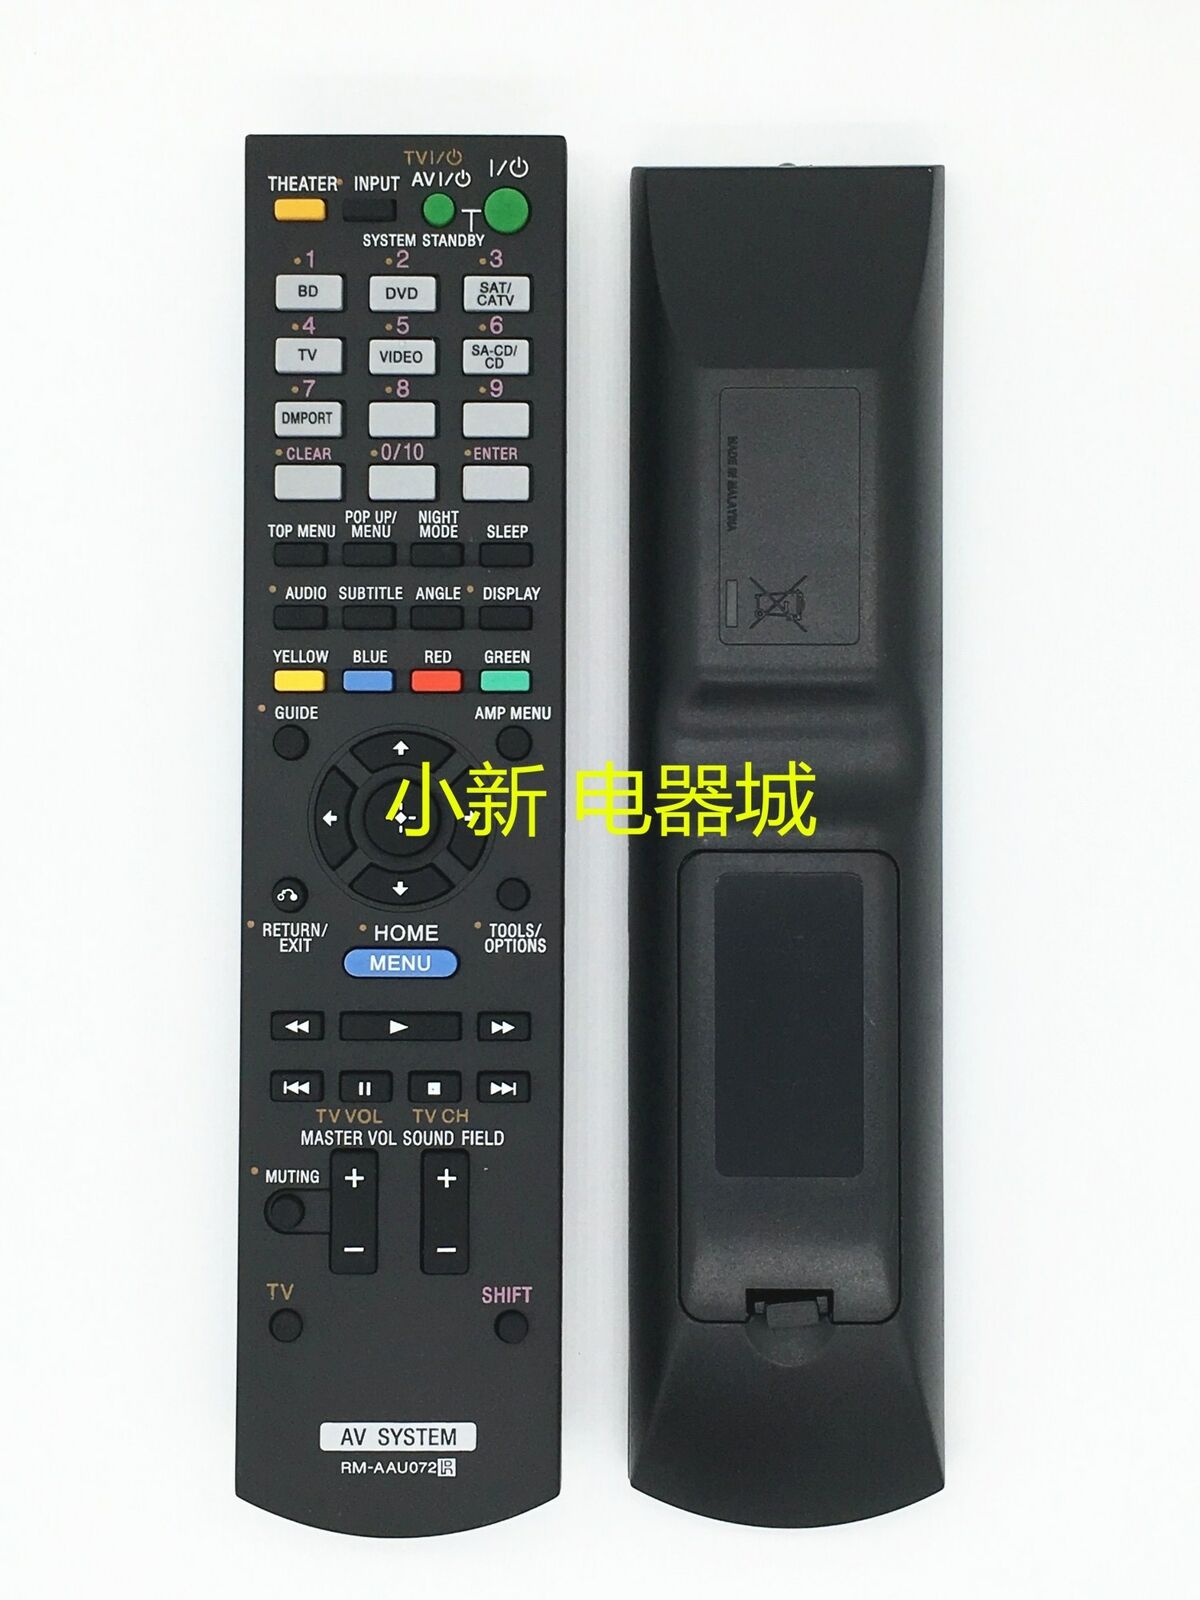 Remote Control for Sony Video Audio SA-WCT150 HT-CT150 HTCT350 Brand: Sony Type: Remote Control Model: RM-AAU072 - Click Image to Close